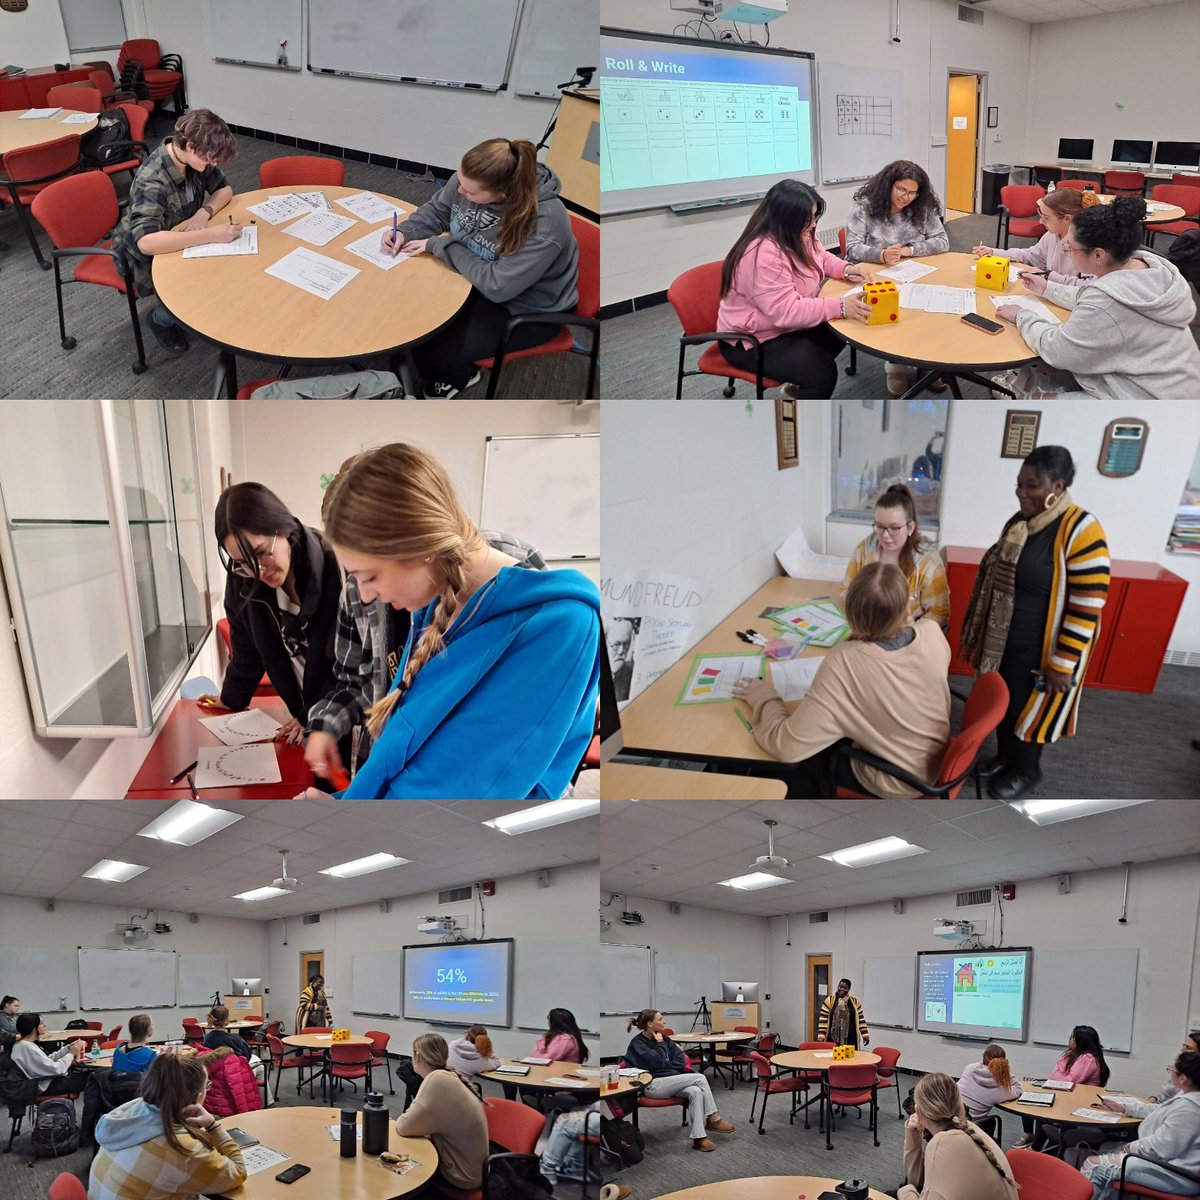 ✨️Tonight, we had a special guest teacher @SyRhey join our EDR class tonight @UHA! 🌟Our future educators engaged in foundational reading station rotations while engaging in thoughtful reflections. I'm so proud of my students' progress as future teachers of Literacy! 🙌😁